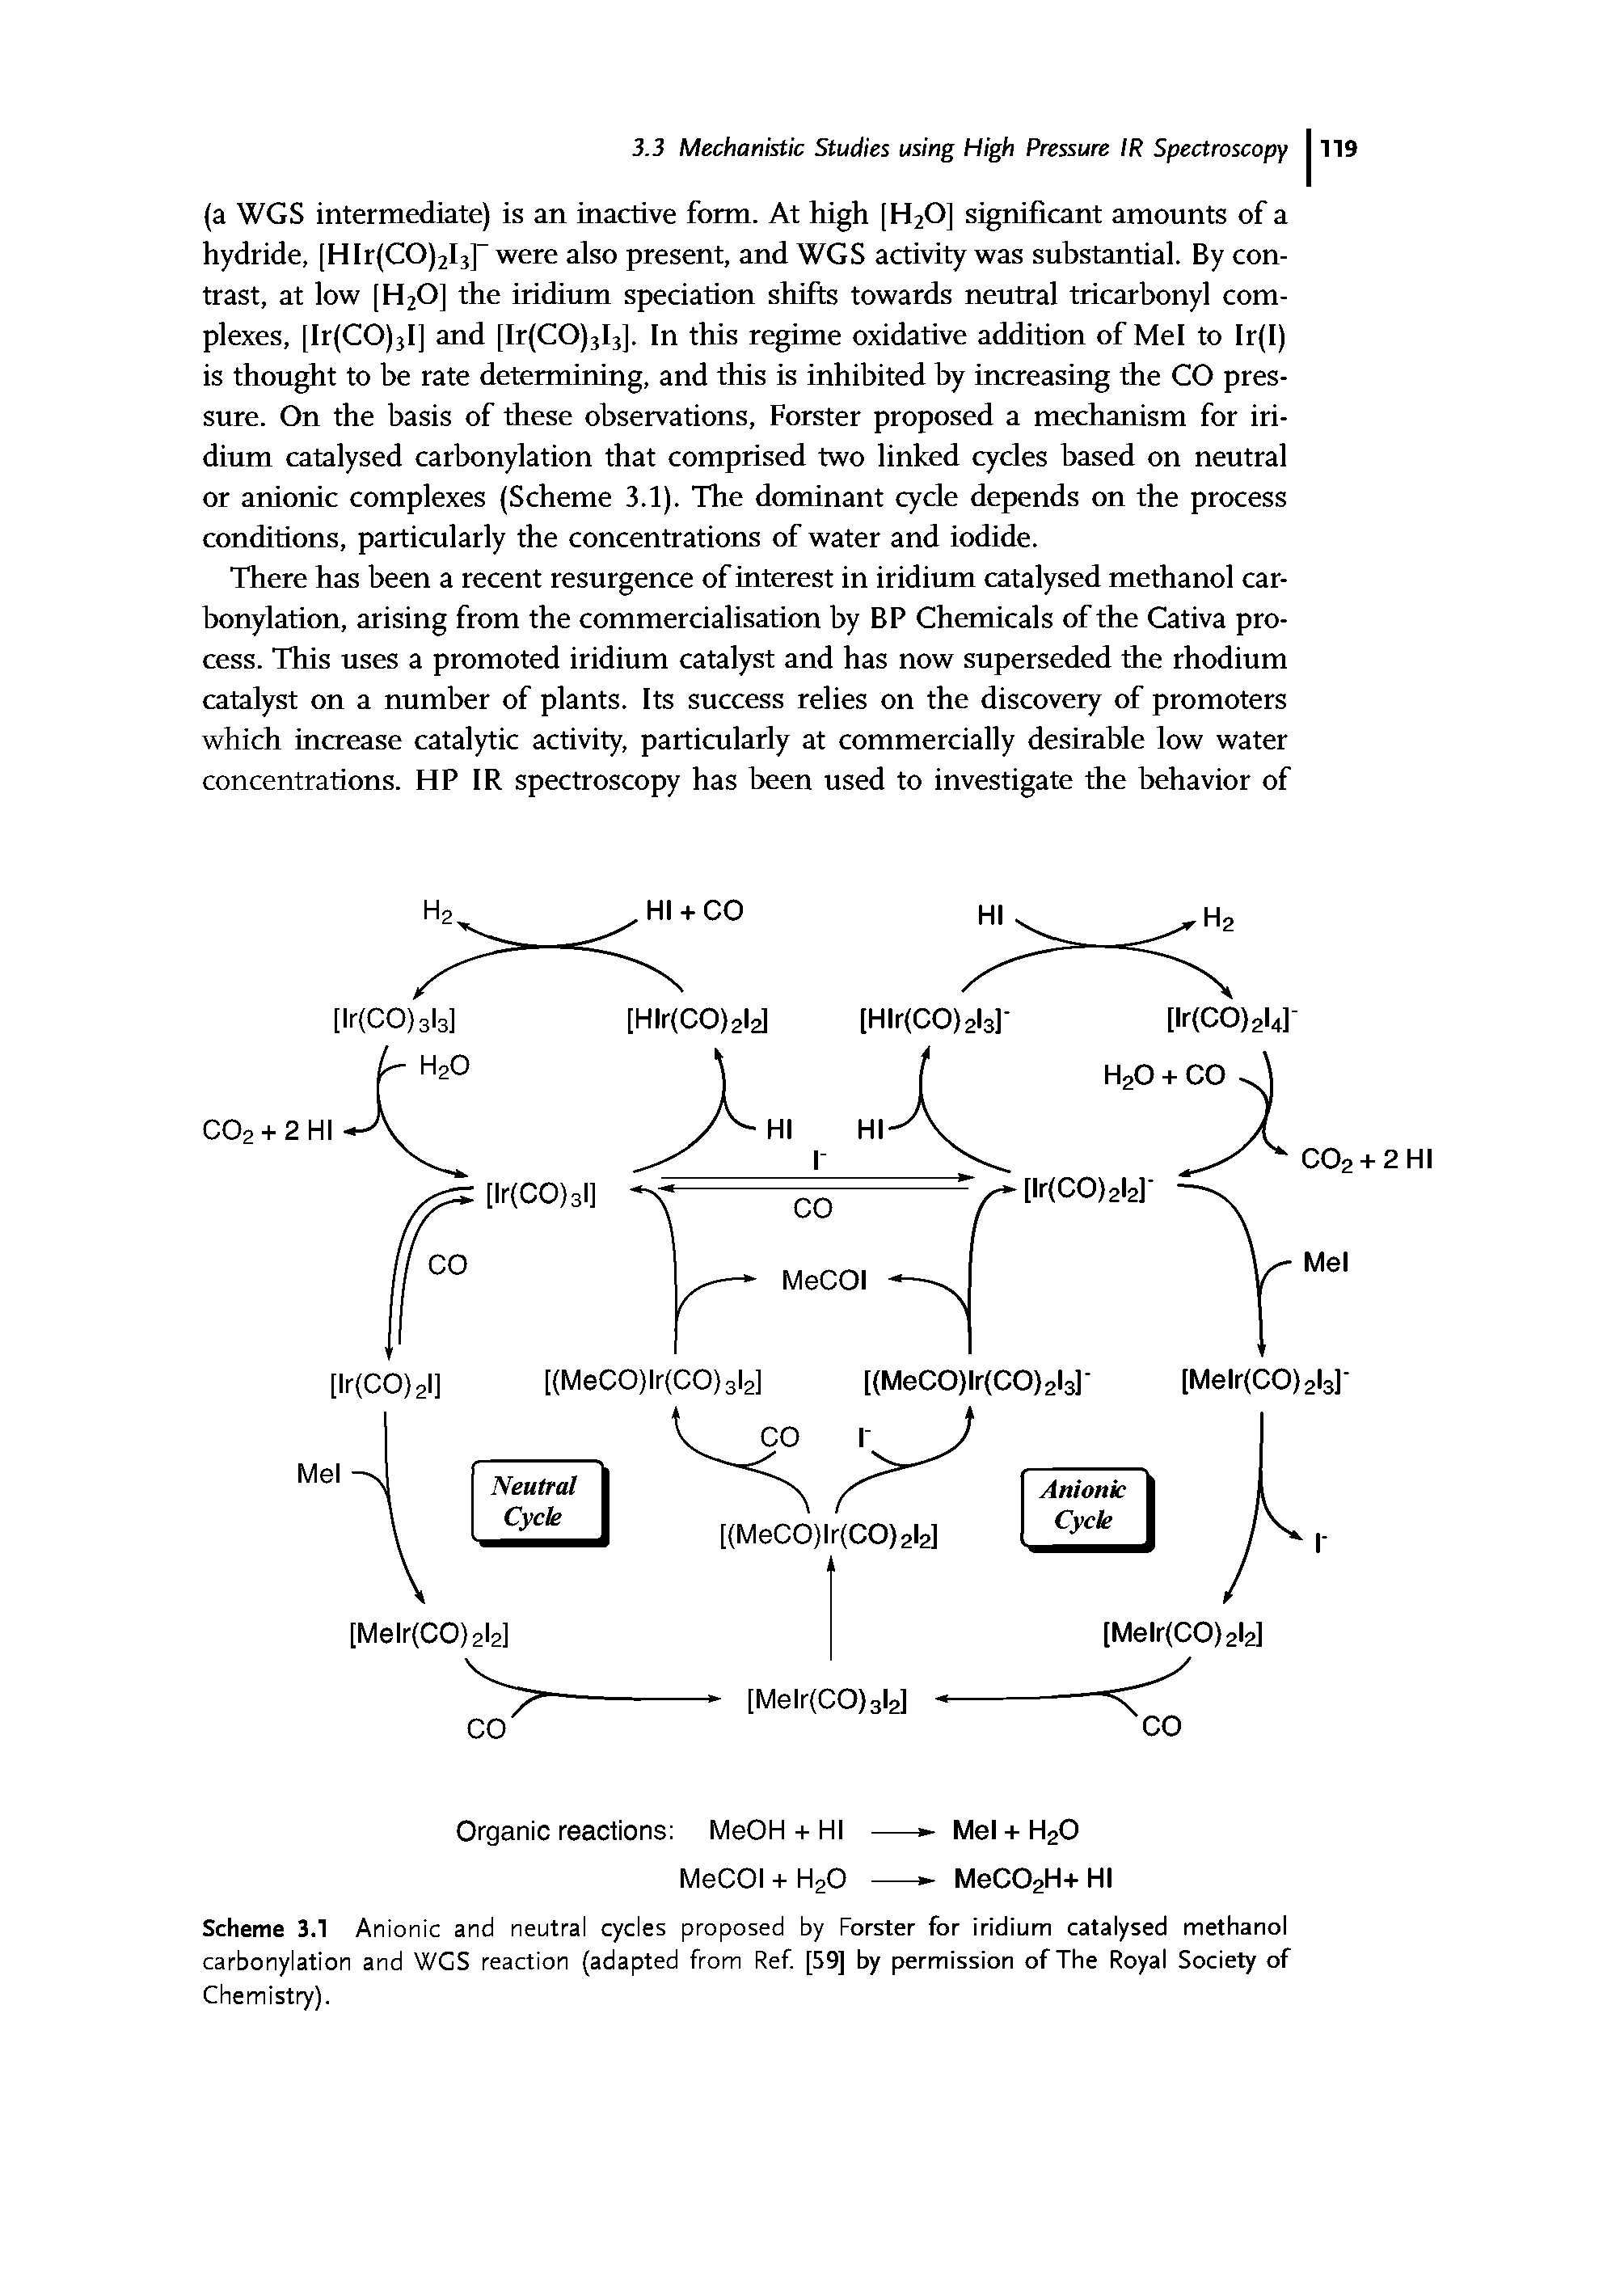 Scheme 3.1 Anionic and neutral cycles proposed by Forster for iridium catalysed methanol carbonylation and WGS reaction (adapted from Ref [59] by permission of The Royal Society of Chemistry).